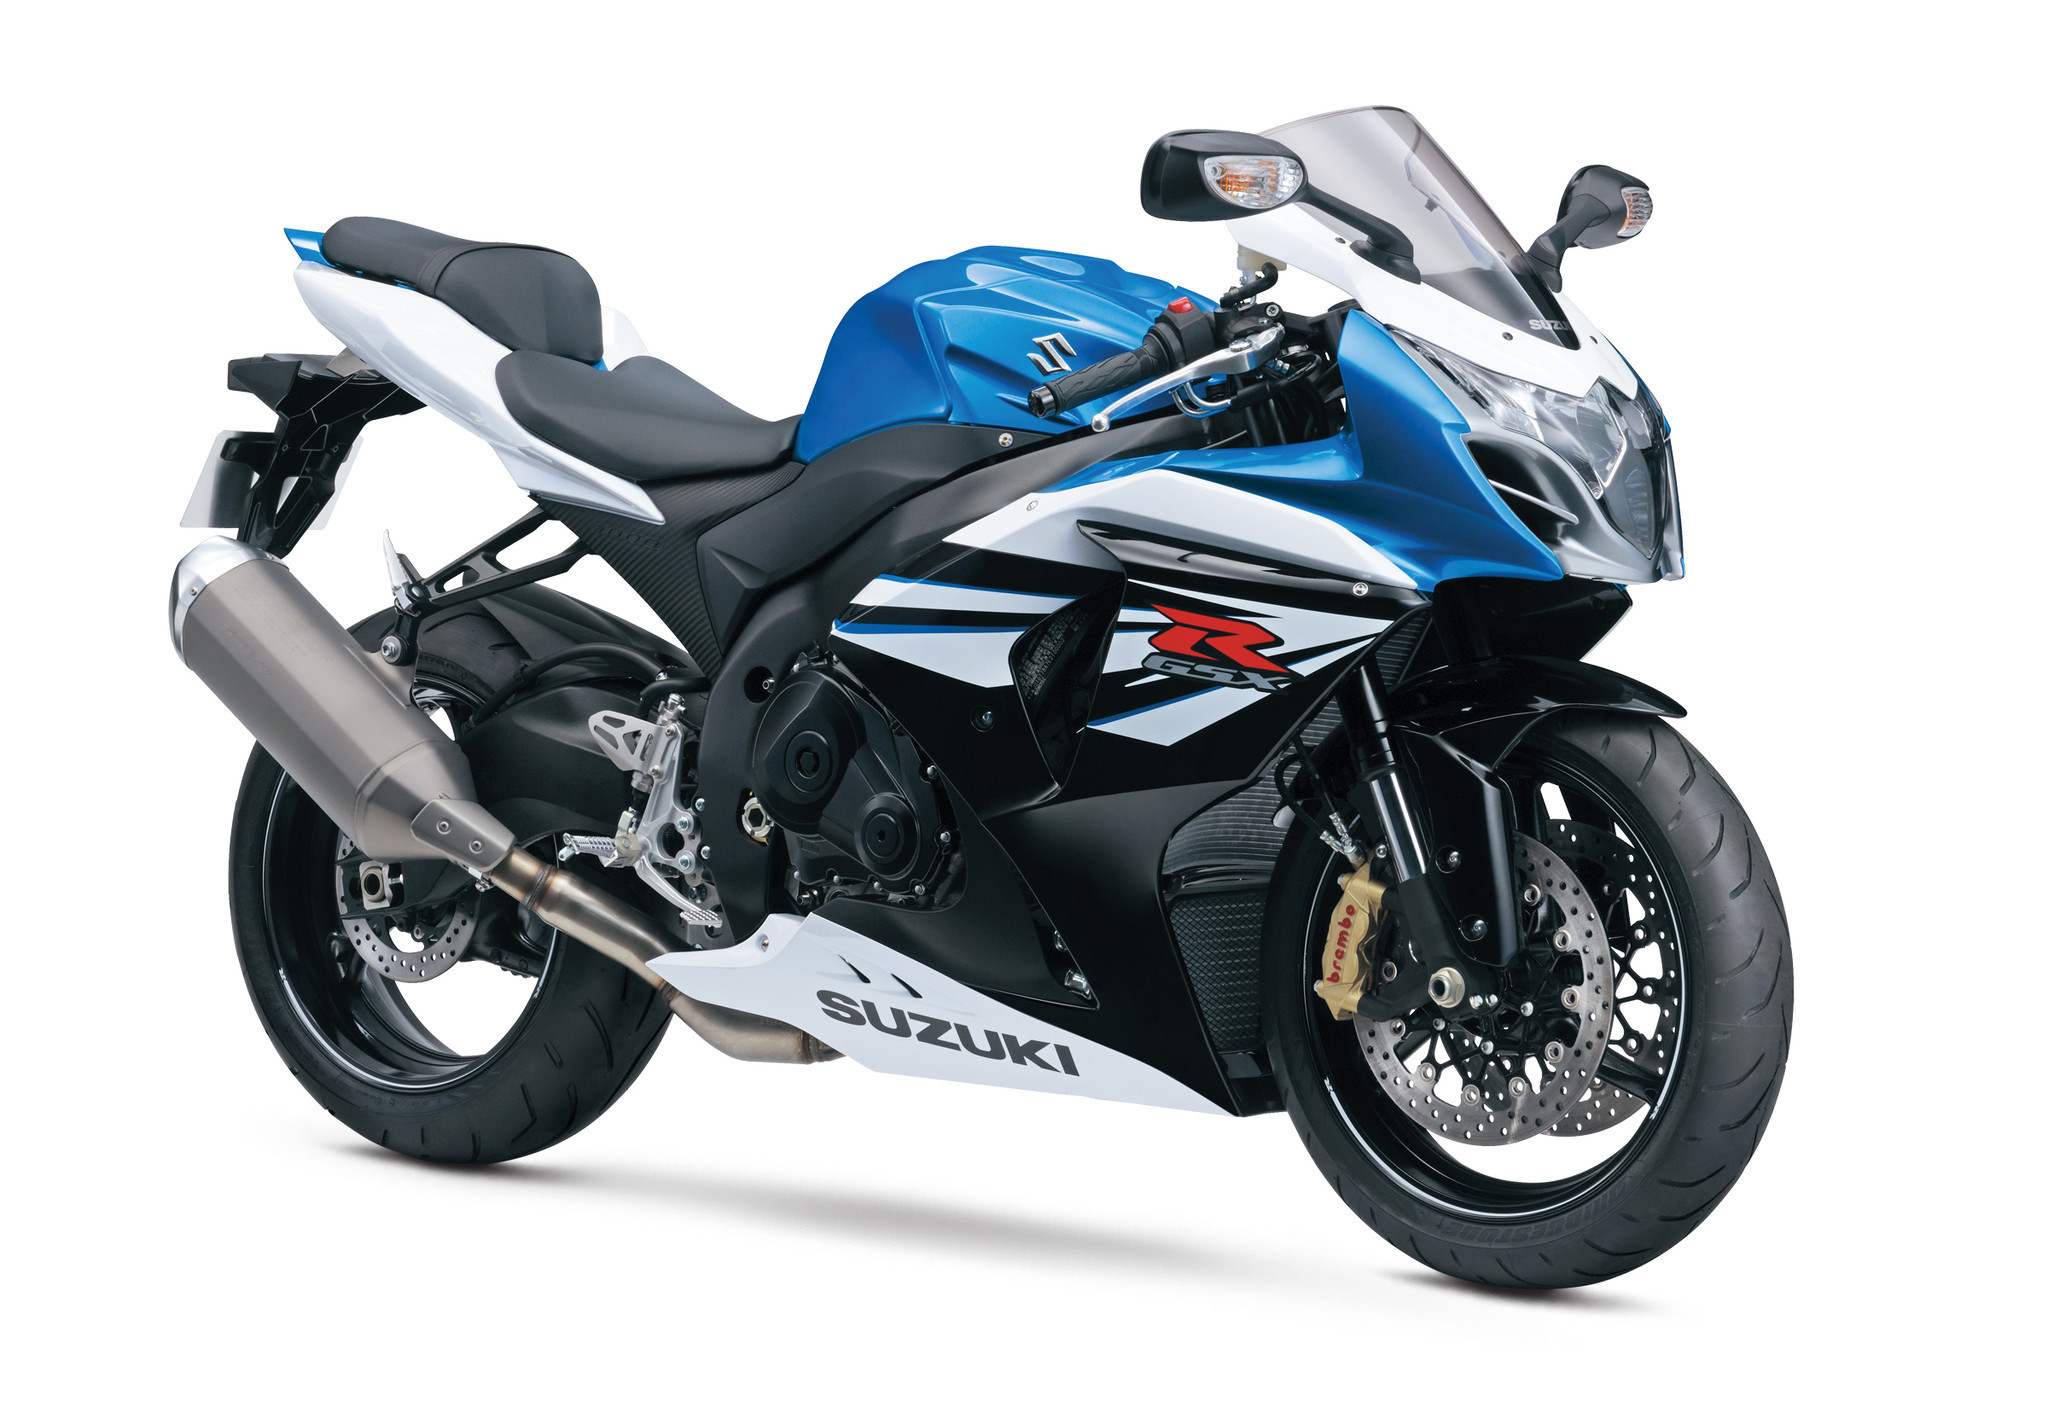 Suzuki offers £1,000 discount on selected models